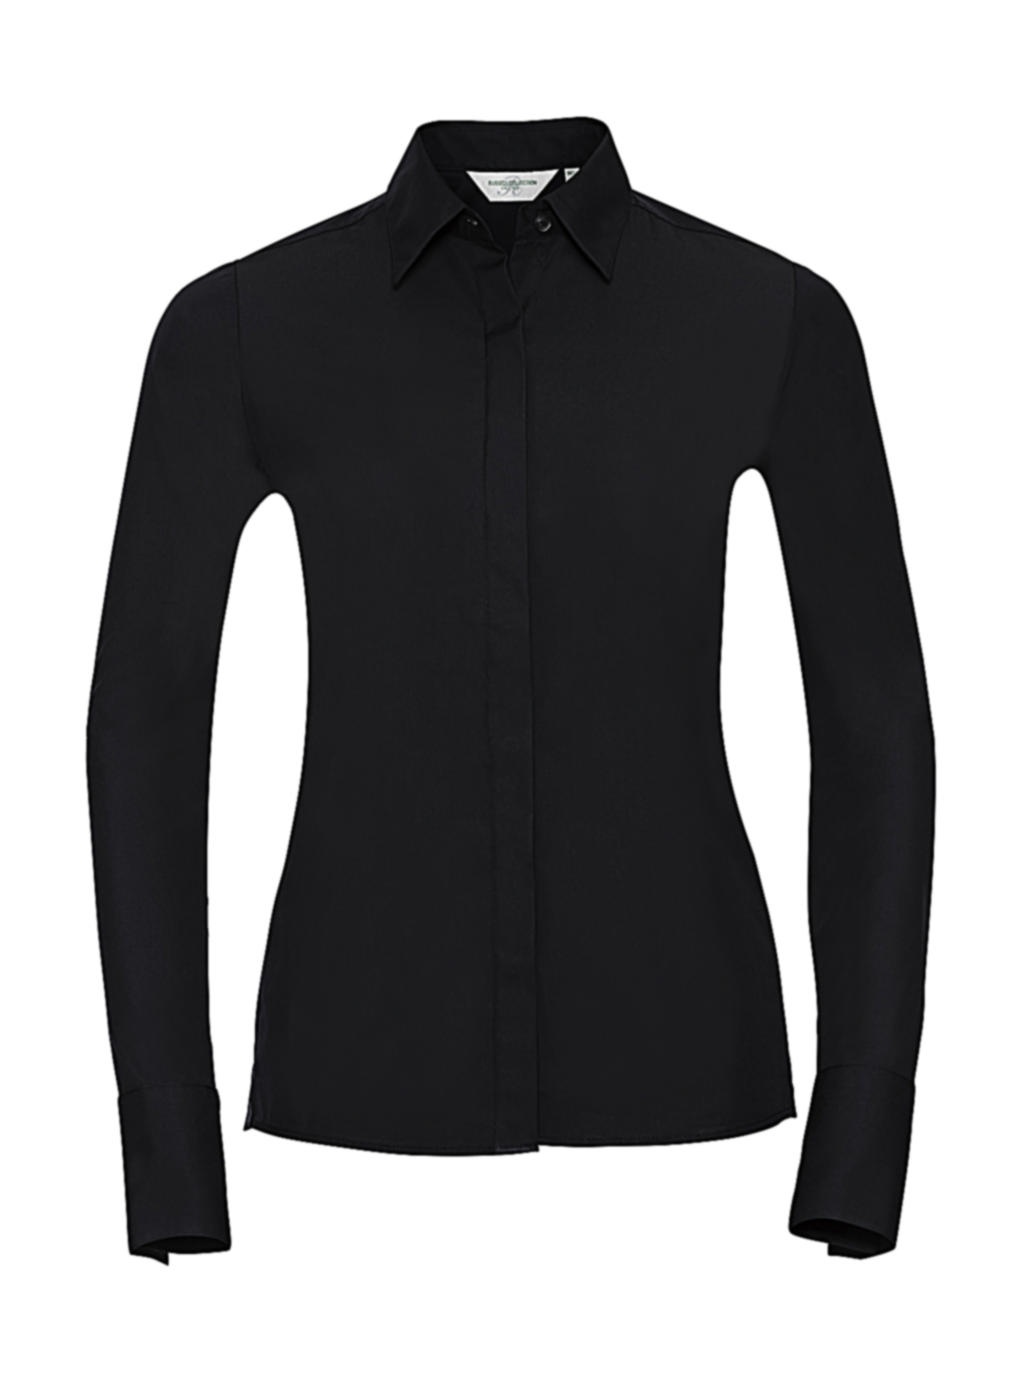  Ladies LS Ultimate Stretch Shirt in Farbe Black